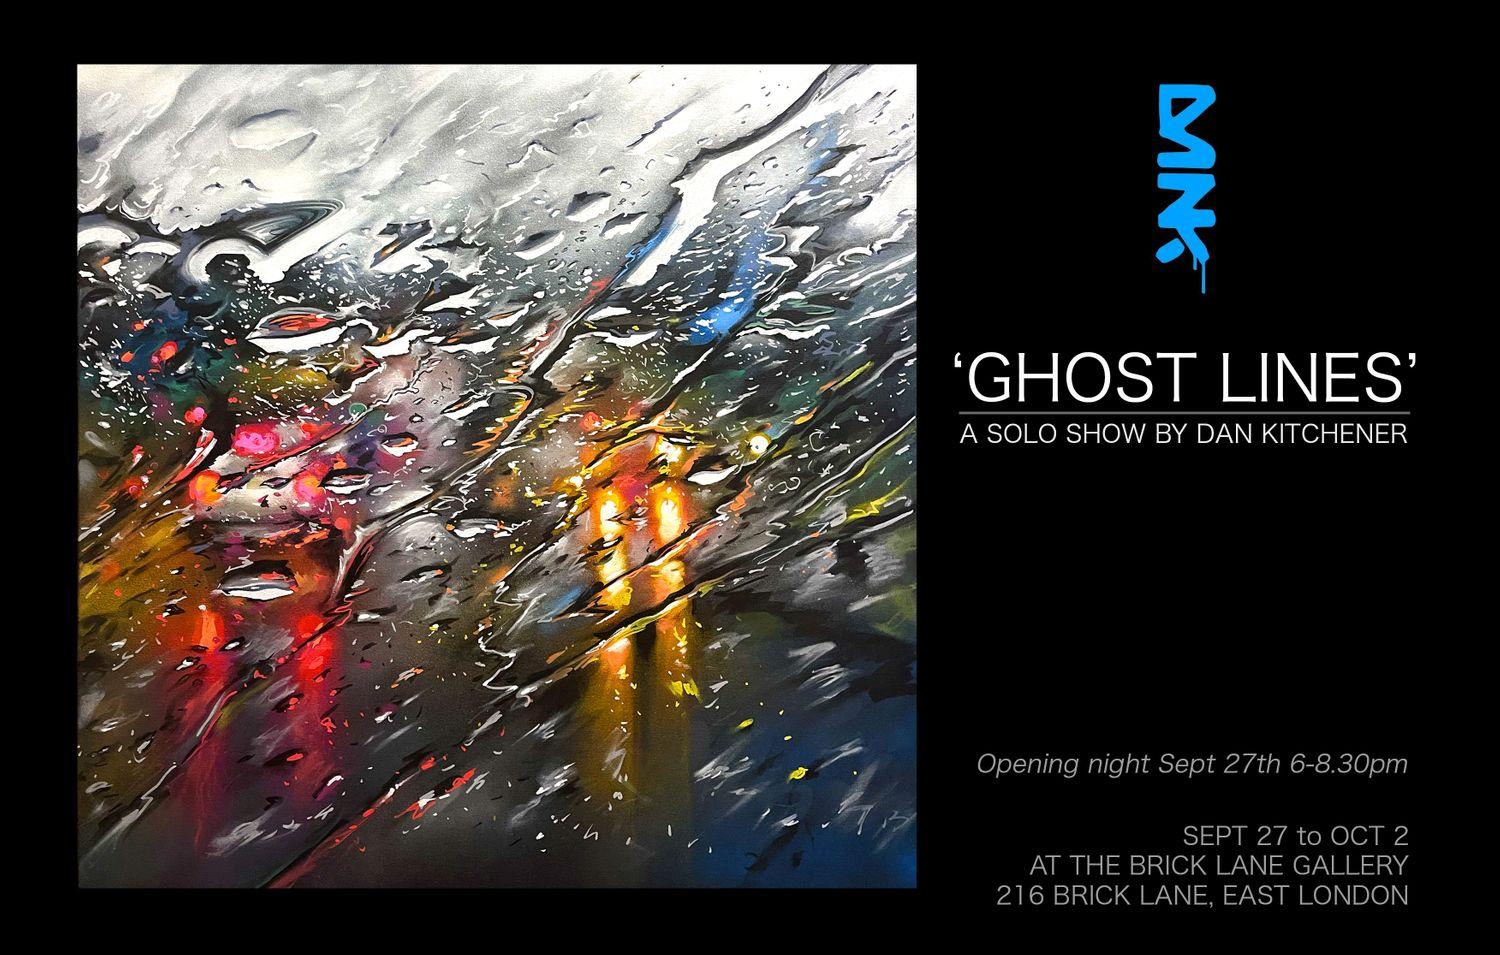 GHOST LINES' - Dan Kitchener Solo Show  | The Brick Lane Gallery